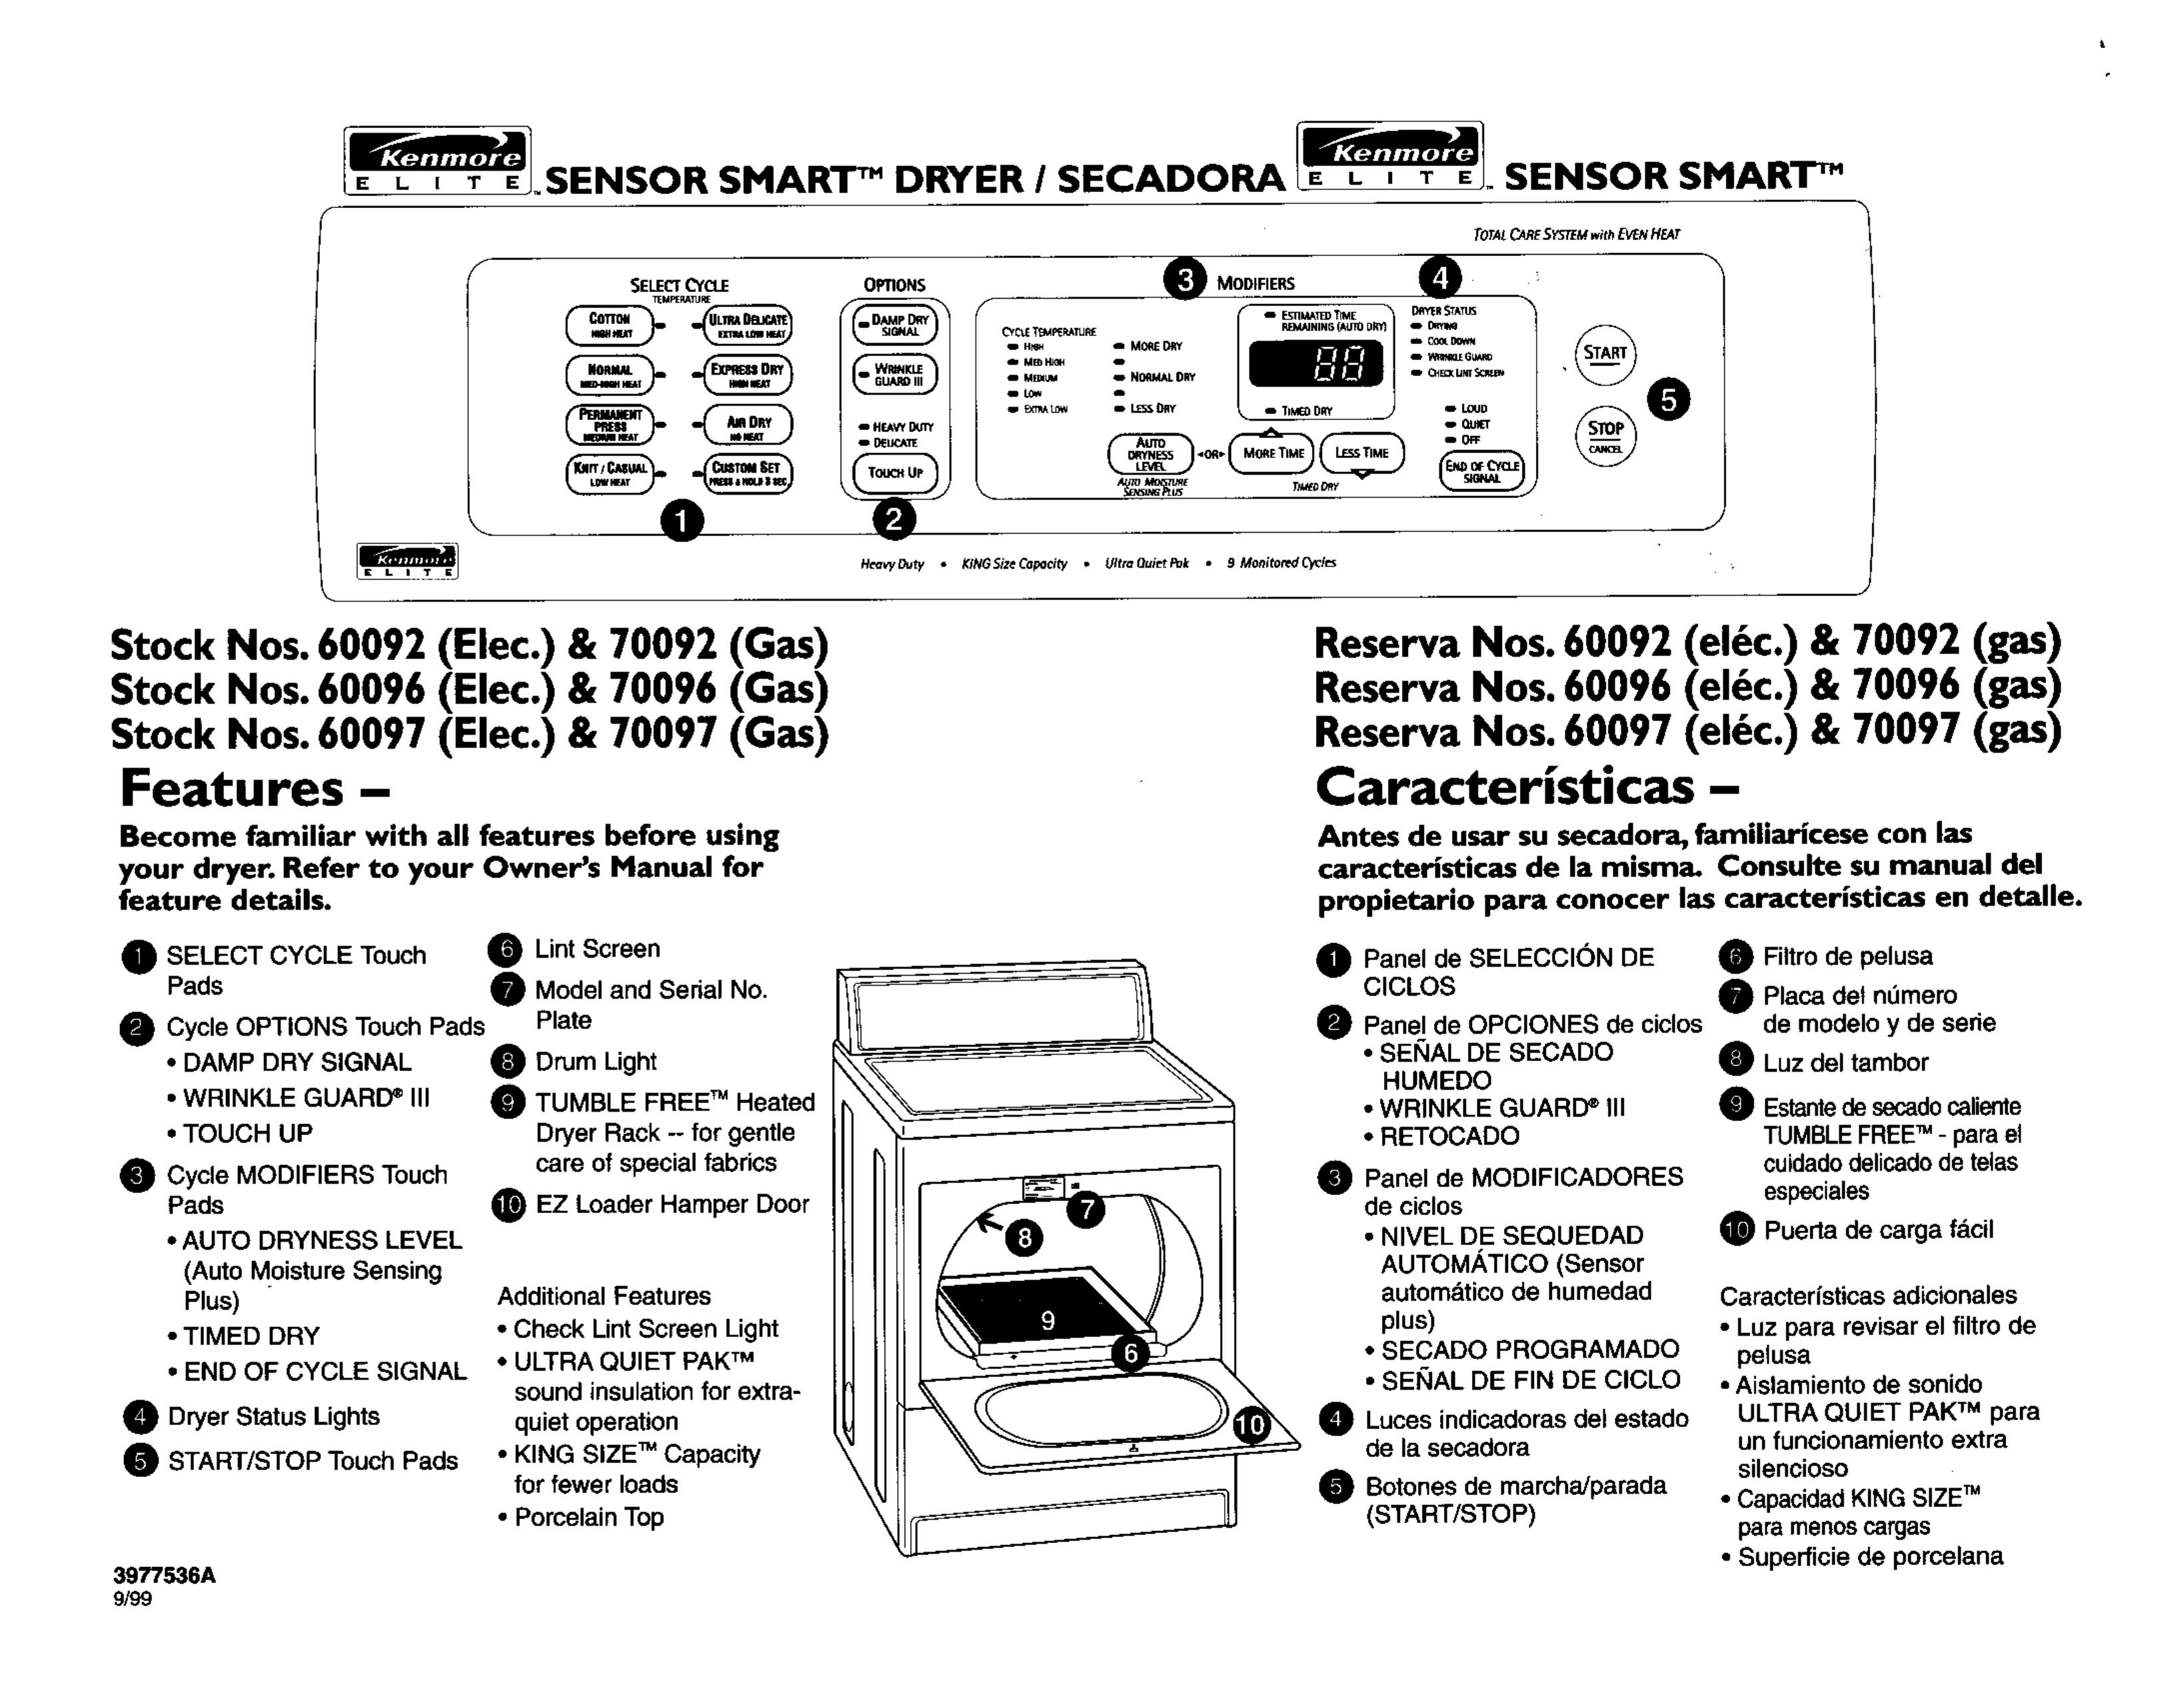 Kenmore 70092 Clothes Dryer User Manual